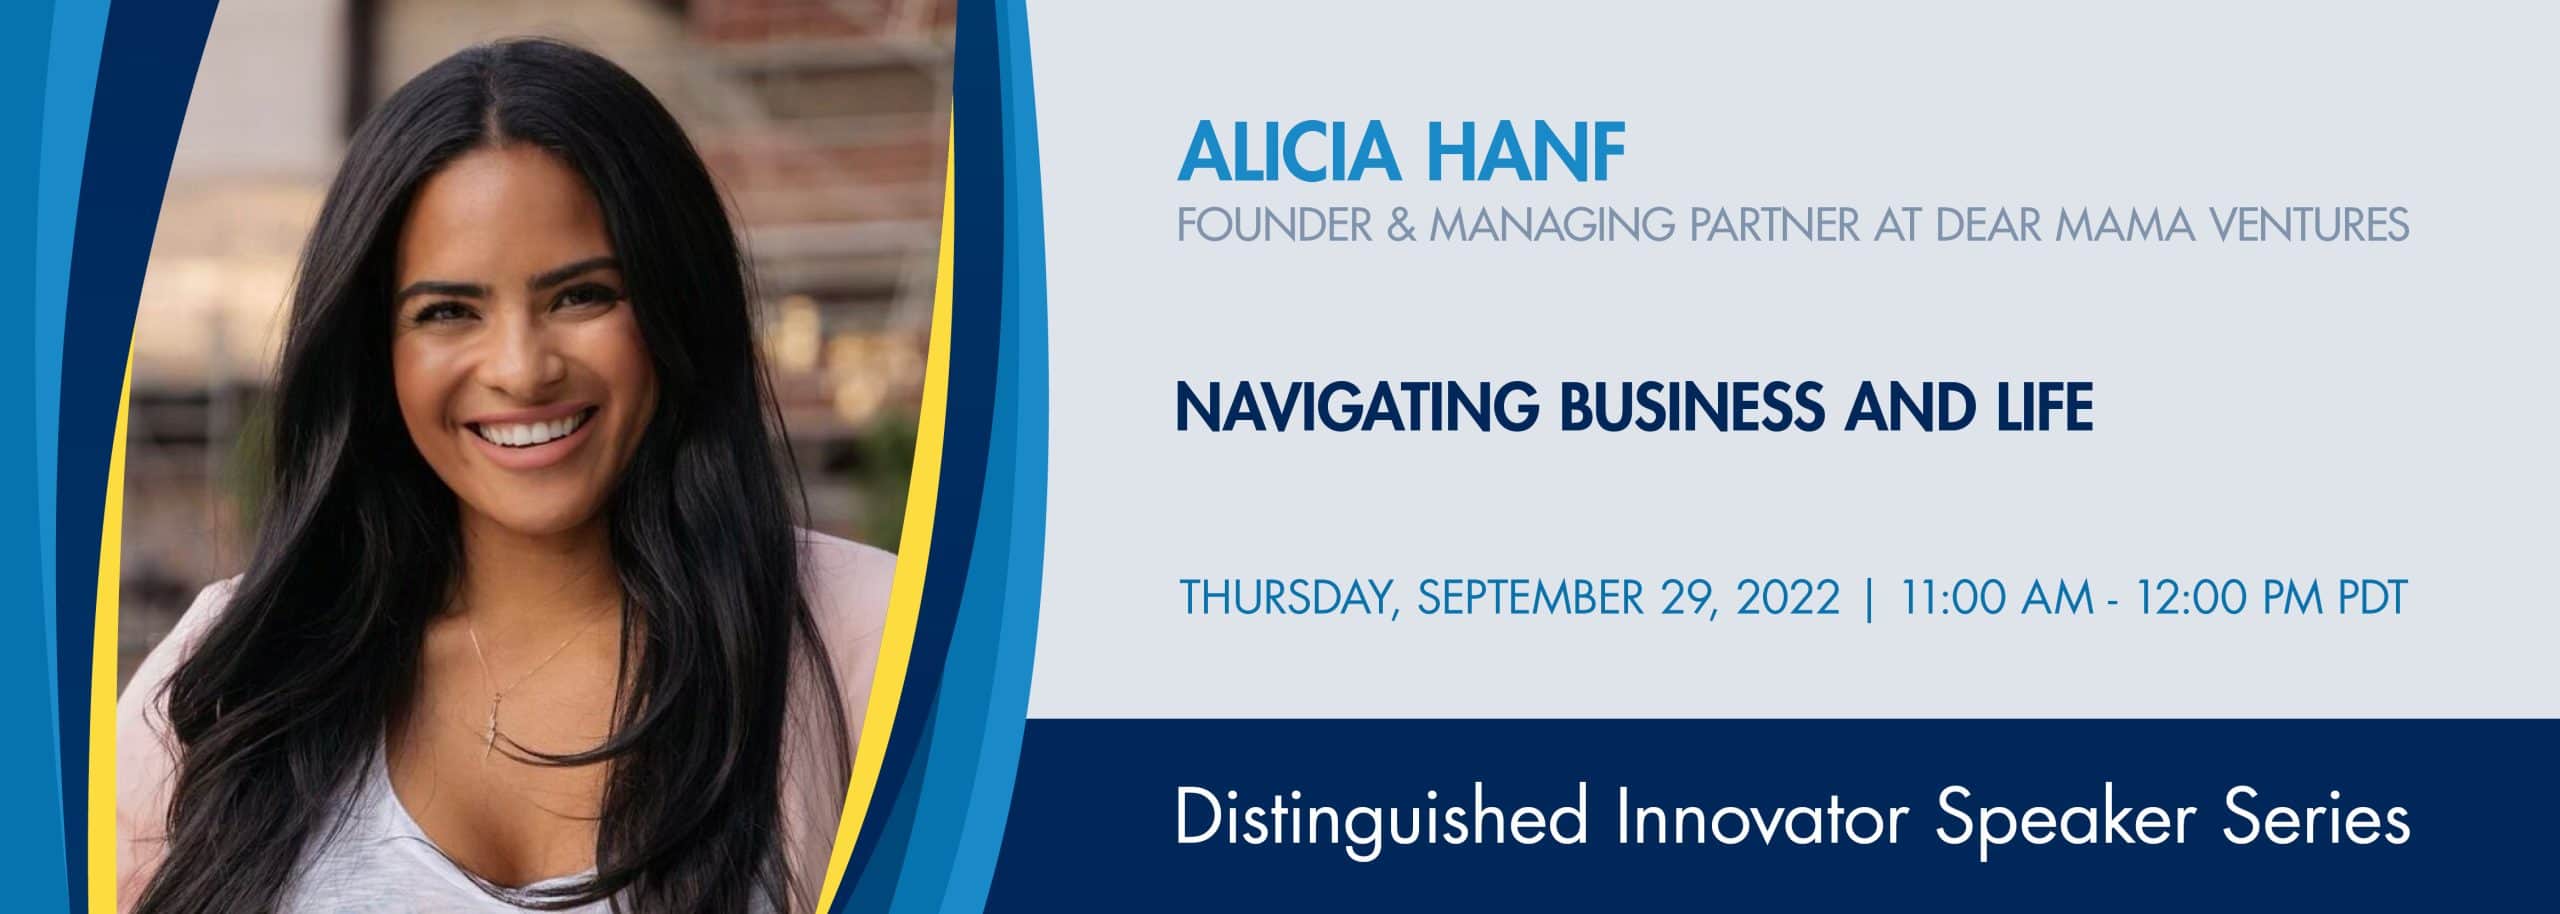 this is an image of westcliff's upcoming distinguished innovator speaker series speaker alicia hanf